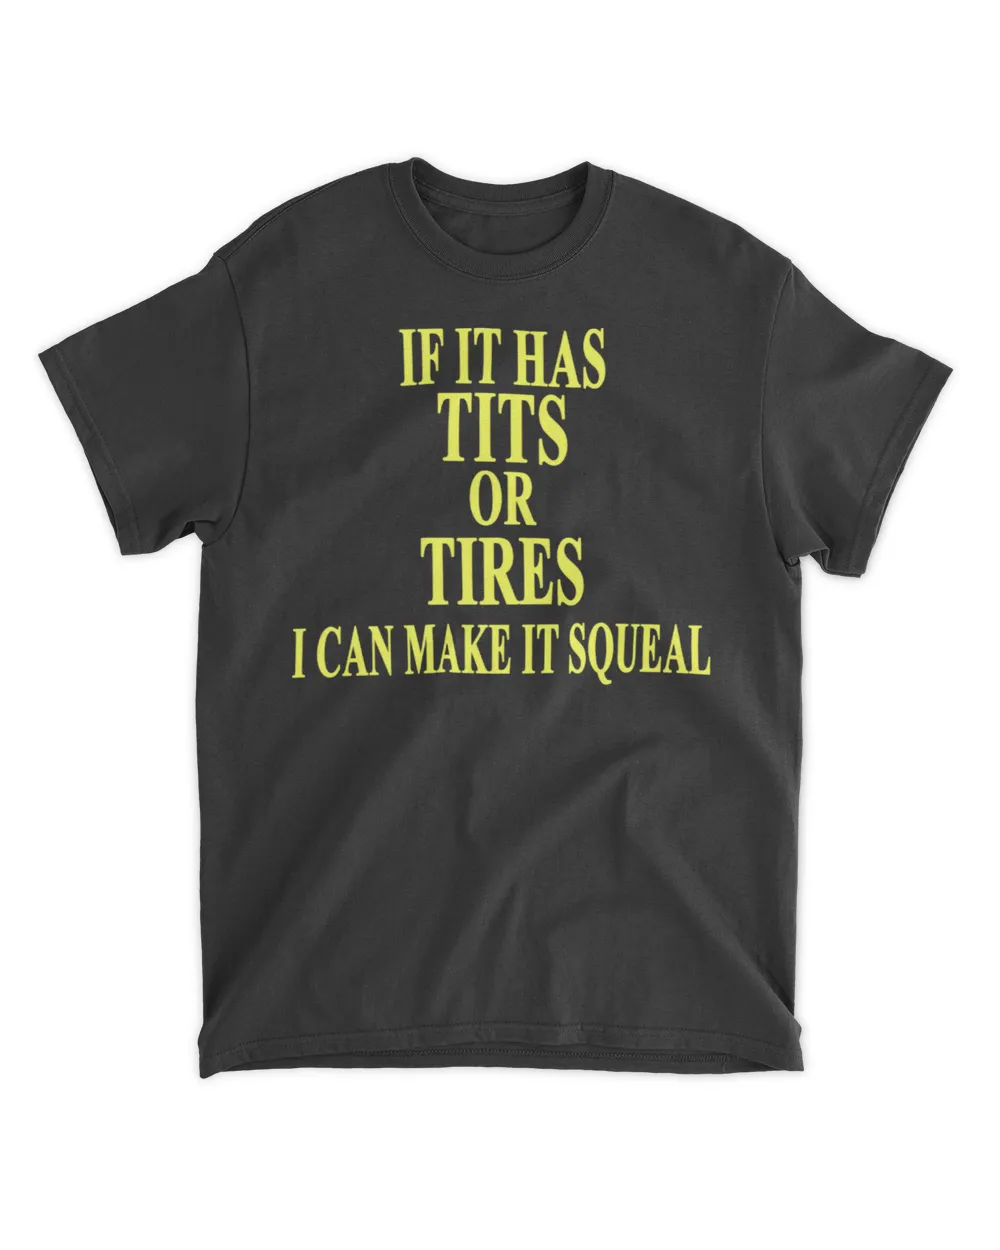  If it has tits and tires I can make it squeal shirt